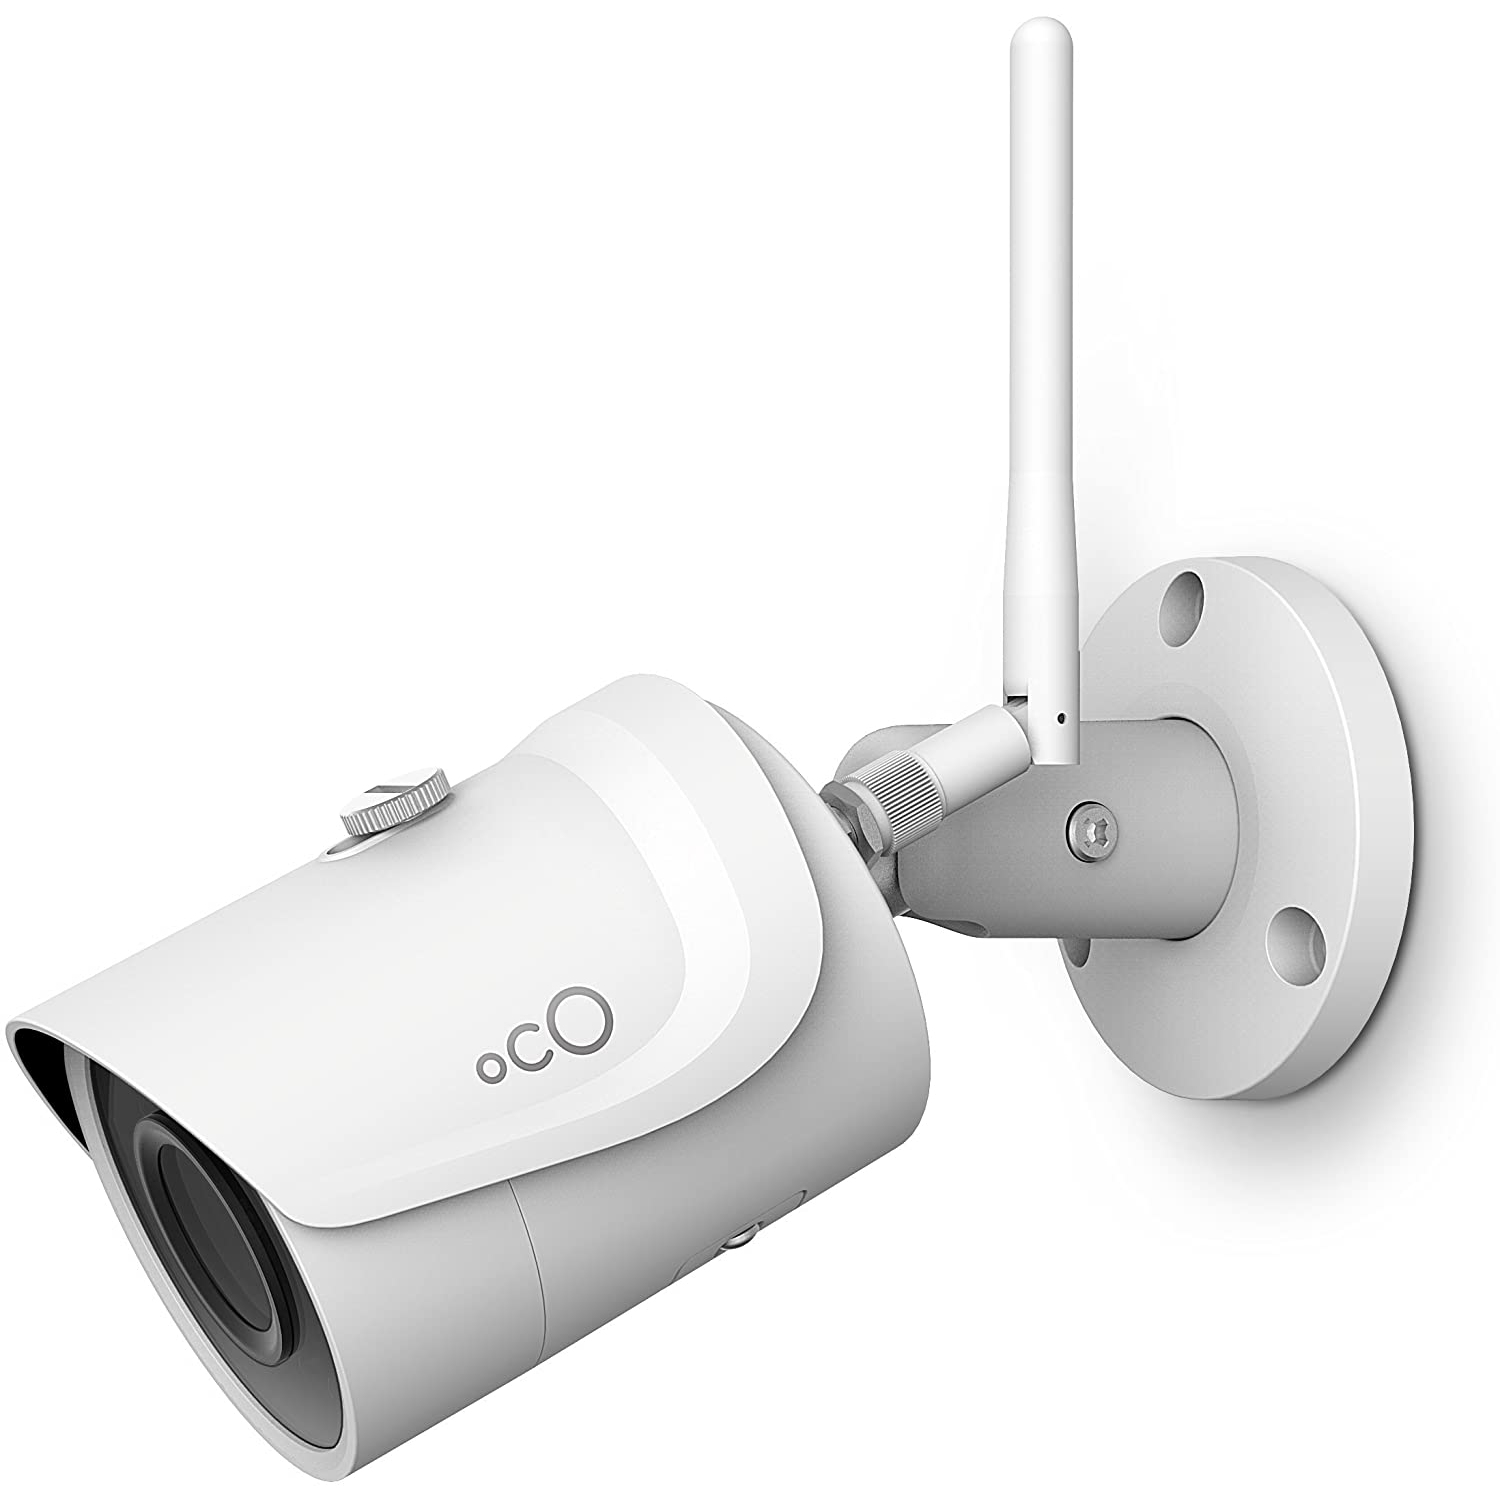 Oco Pro Bullet v2 - FullHD Wi-Fi 1080p Security Camera with Micro SD Card Support and Cloud Storage